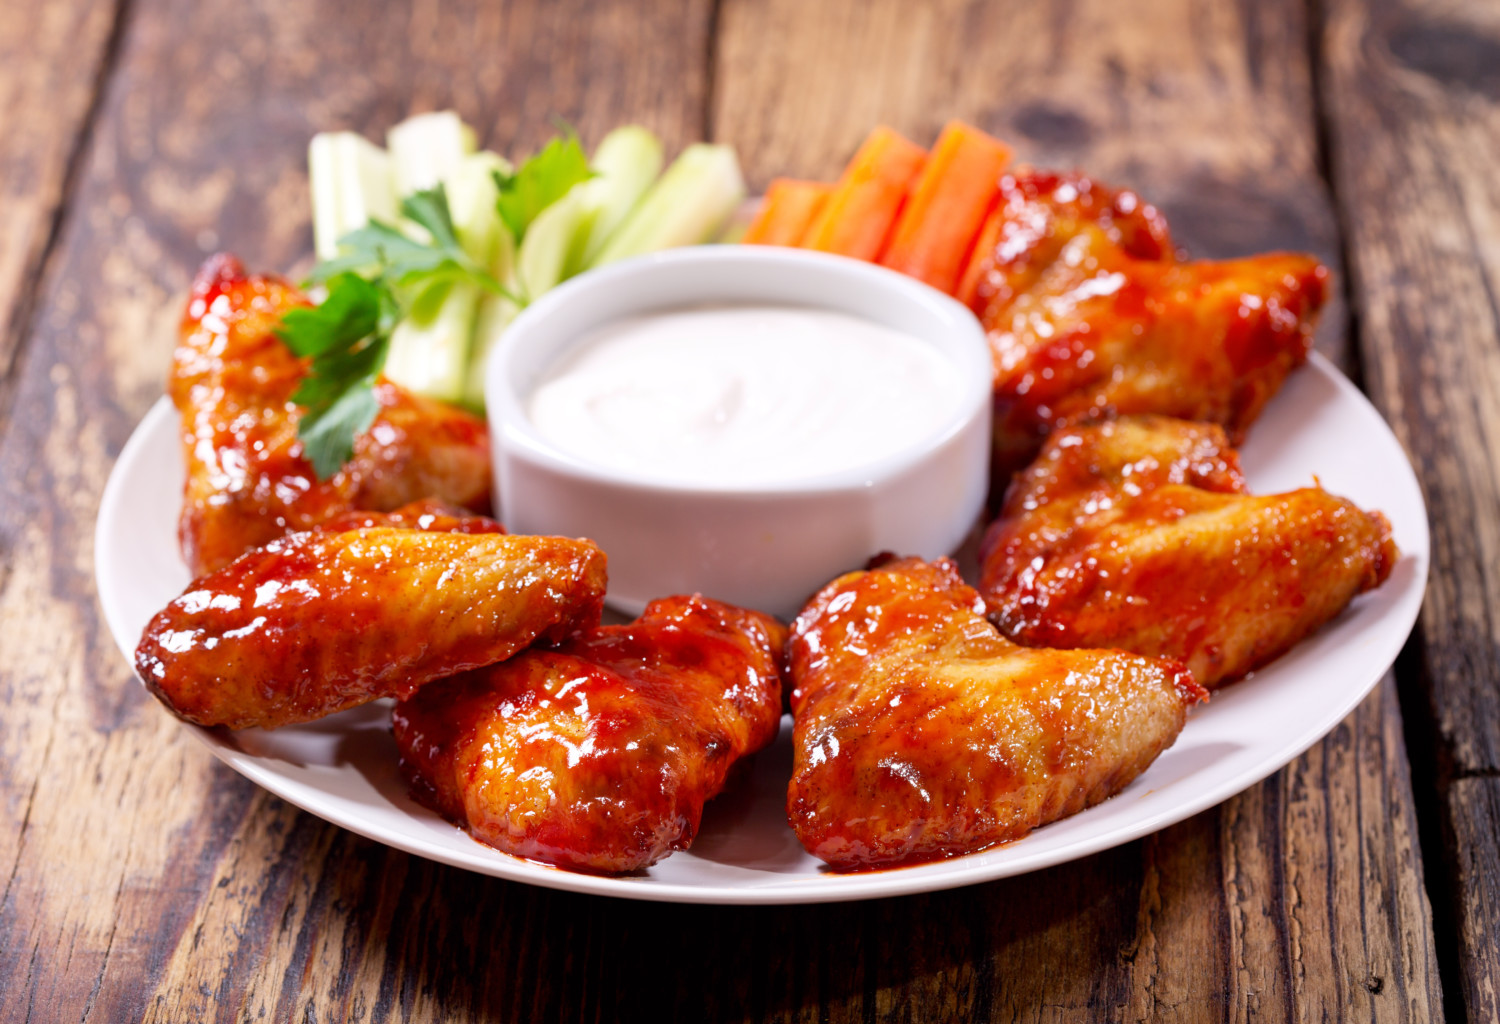 Buffalo wings on plate with dip and celery